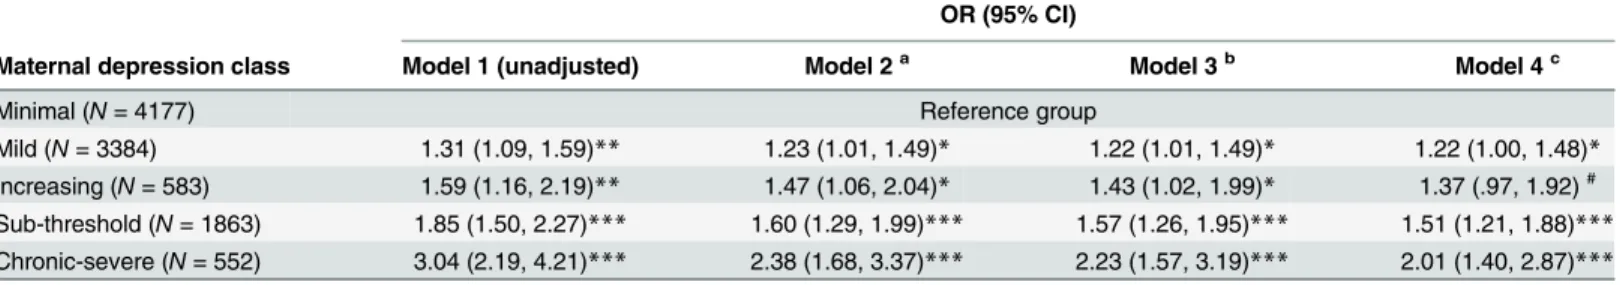 Table 2. Logistic regression analyses showing association between each class of maternal depression symptoms in comparison to minimal class (reference group) and subsequent offspring past year suicidal ideation at age 16 years (Odds Ratios (OR) and 95% Con